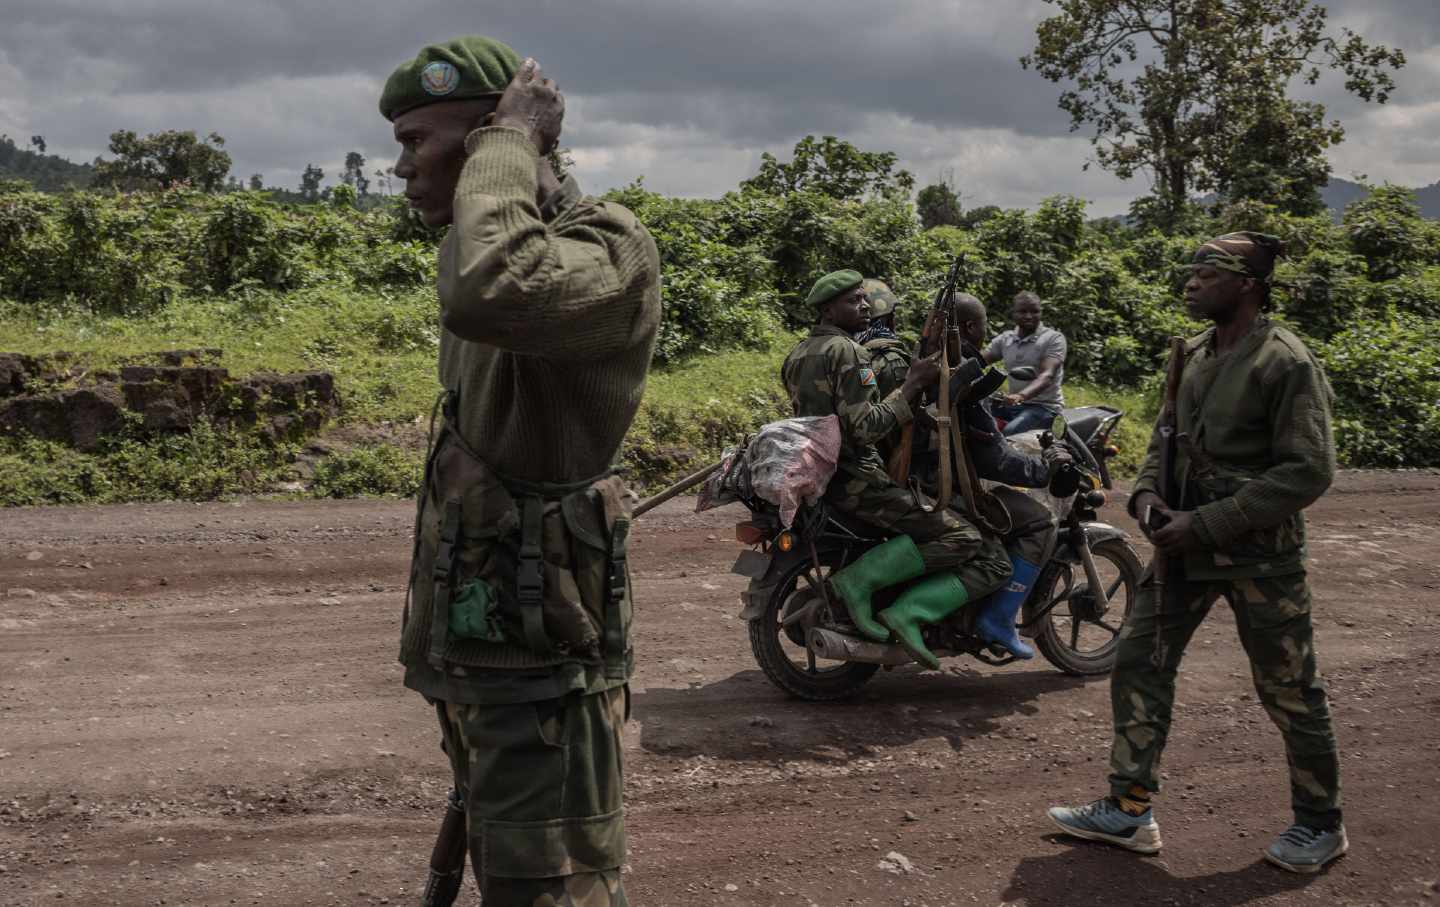 Soldiers patrol Goma, a town in eastern Democratic Republic of Congo. It was attacked by M23 rebels in clashes with the Congolese army.